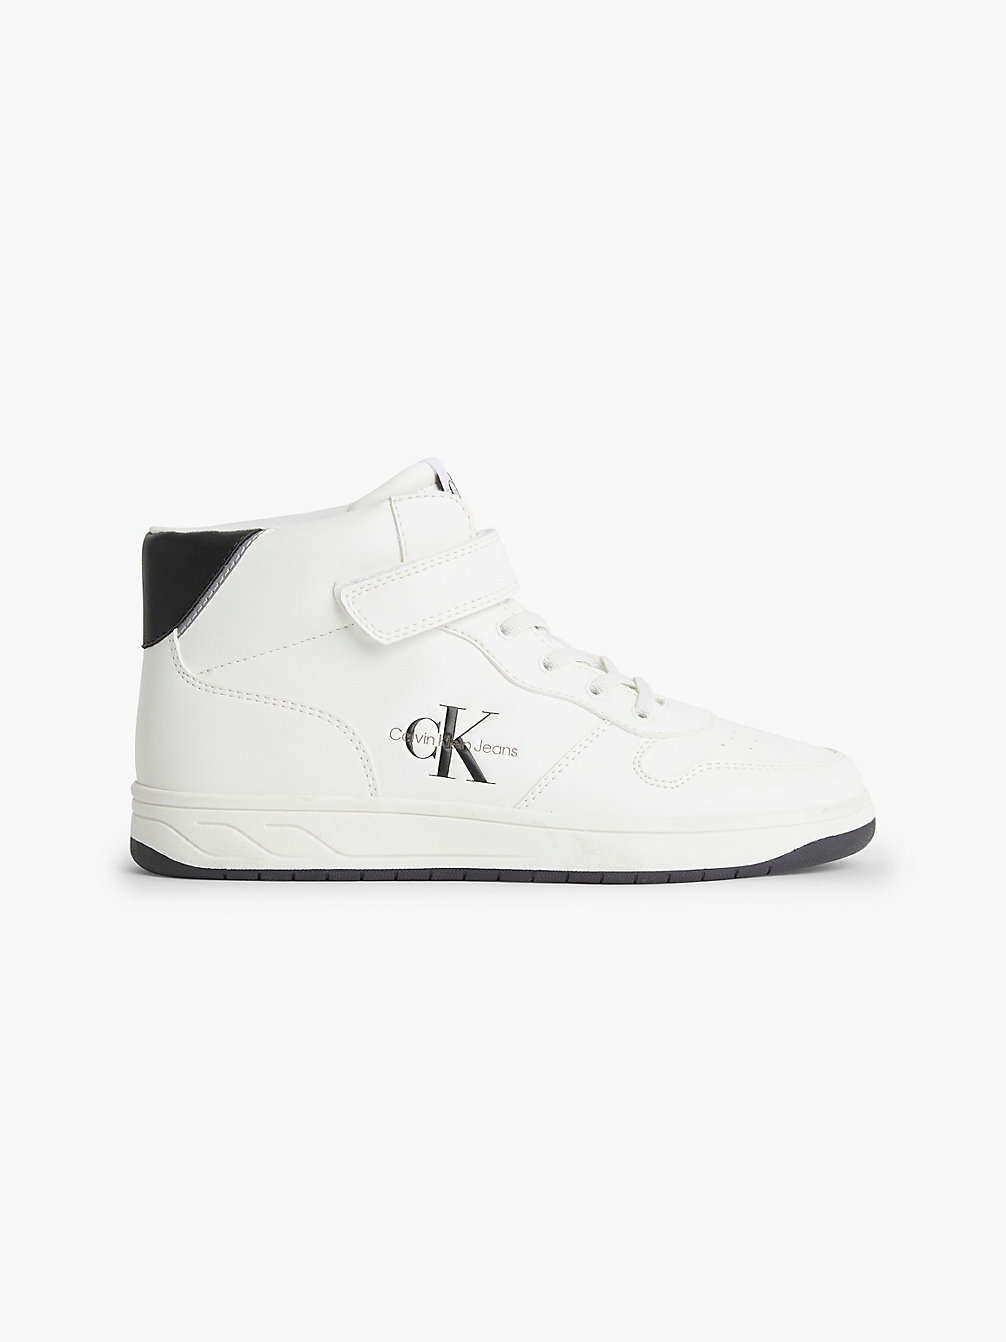 WHITE / BLACK Recycled Kids High-Top Trainers undefined kids unisex Calvin Klein